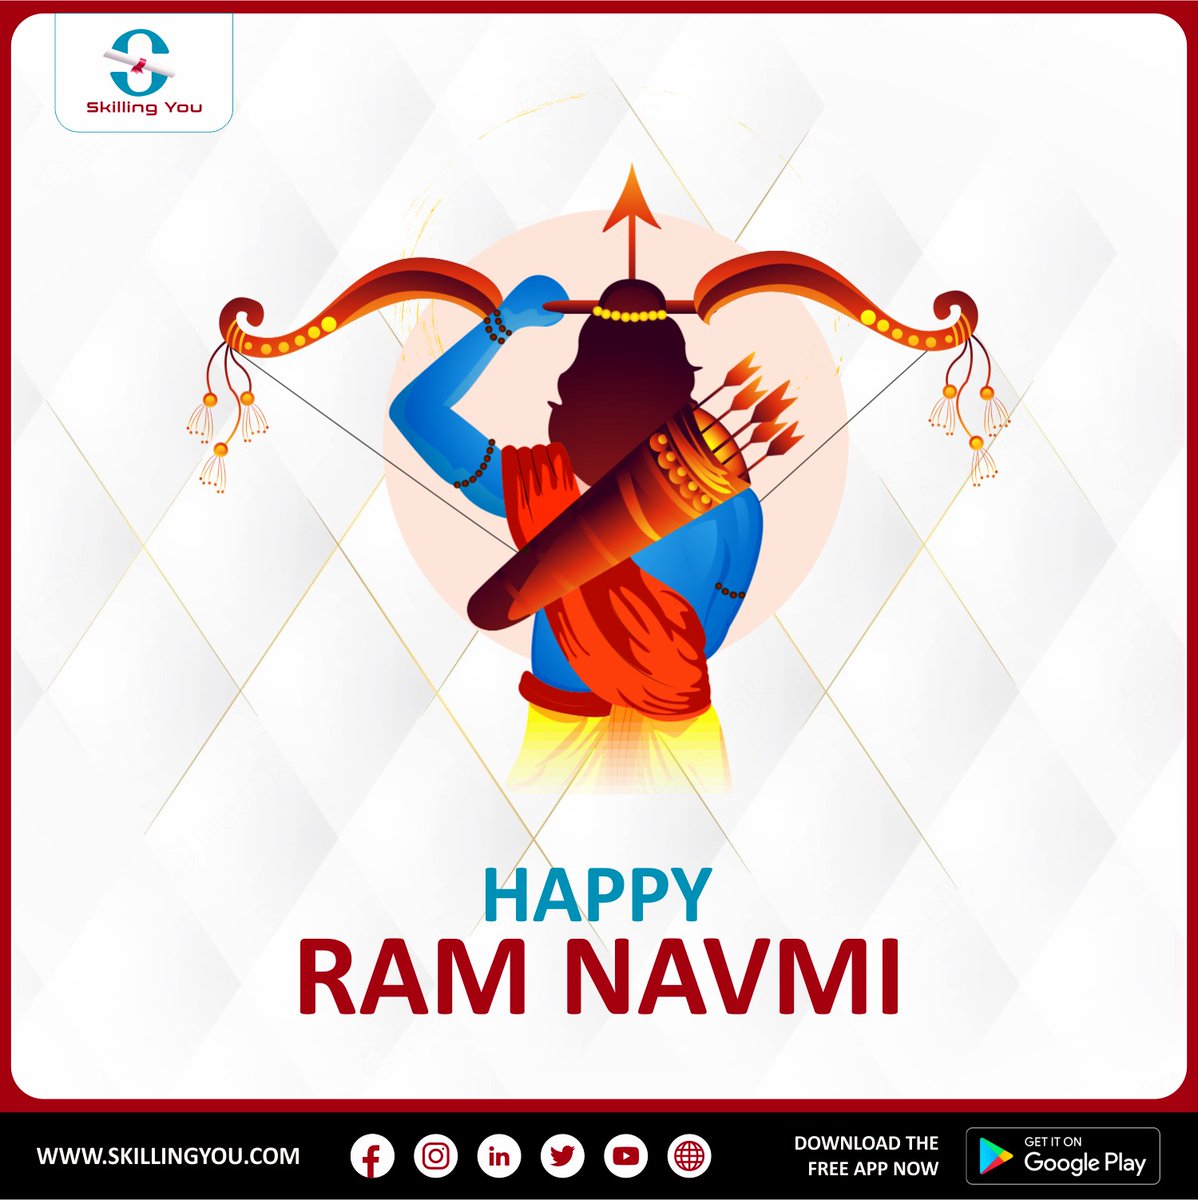 May the divine grace of Lord Rama always be with you.✨

Skilling You is wishing you all a very happy and prosperous Ram Navami!🎉
.
.
.
.
.
#ramnavmi #lordrama #hindufestival #ramnavmi2023 #festival #skillingyou #navratri